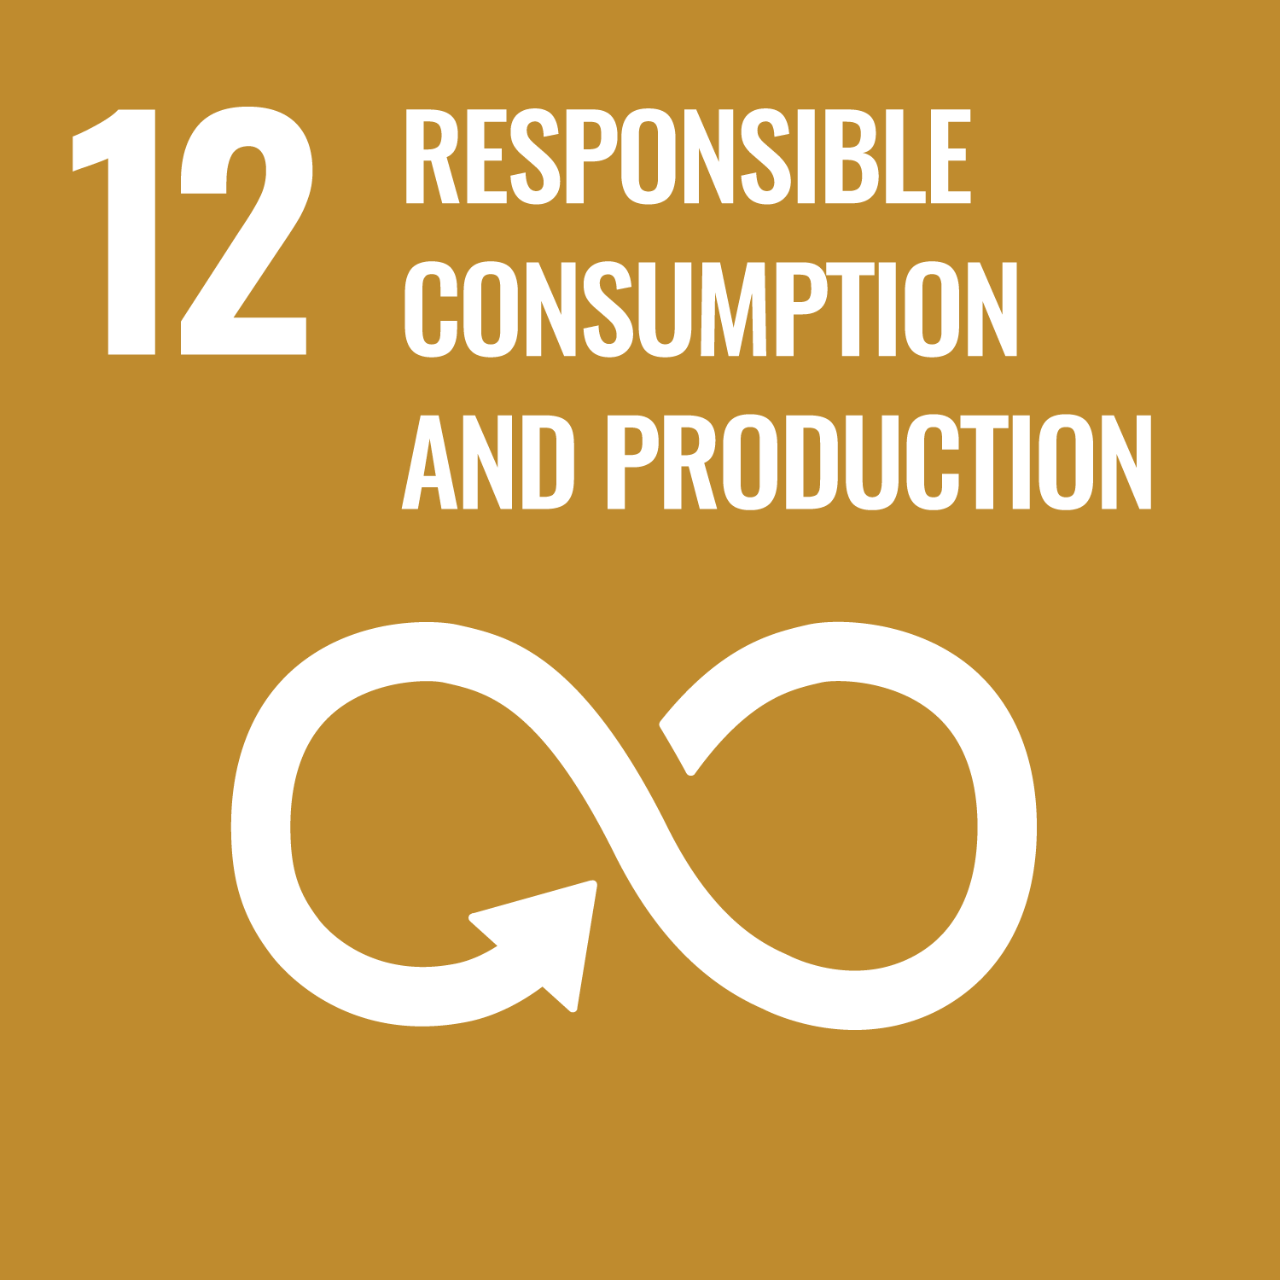 Gold icon with graphic of infinity symbol to represent UNSDG Goal 12: Responsible Consumption and Production